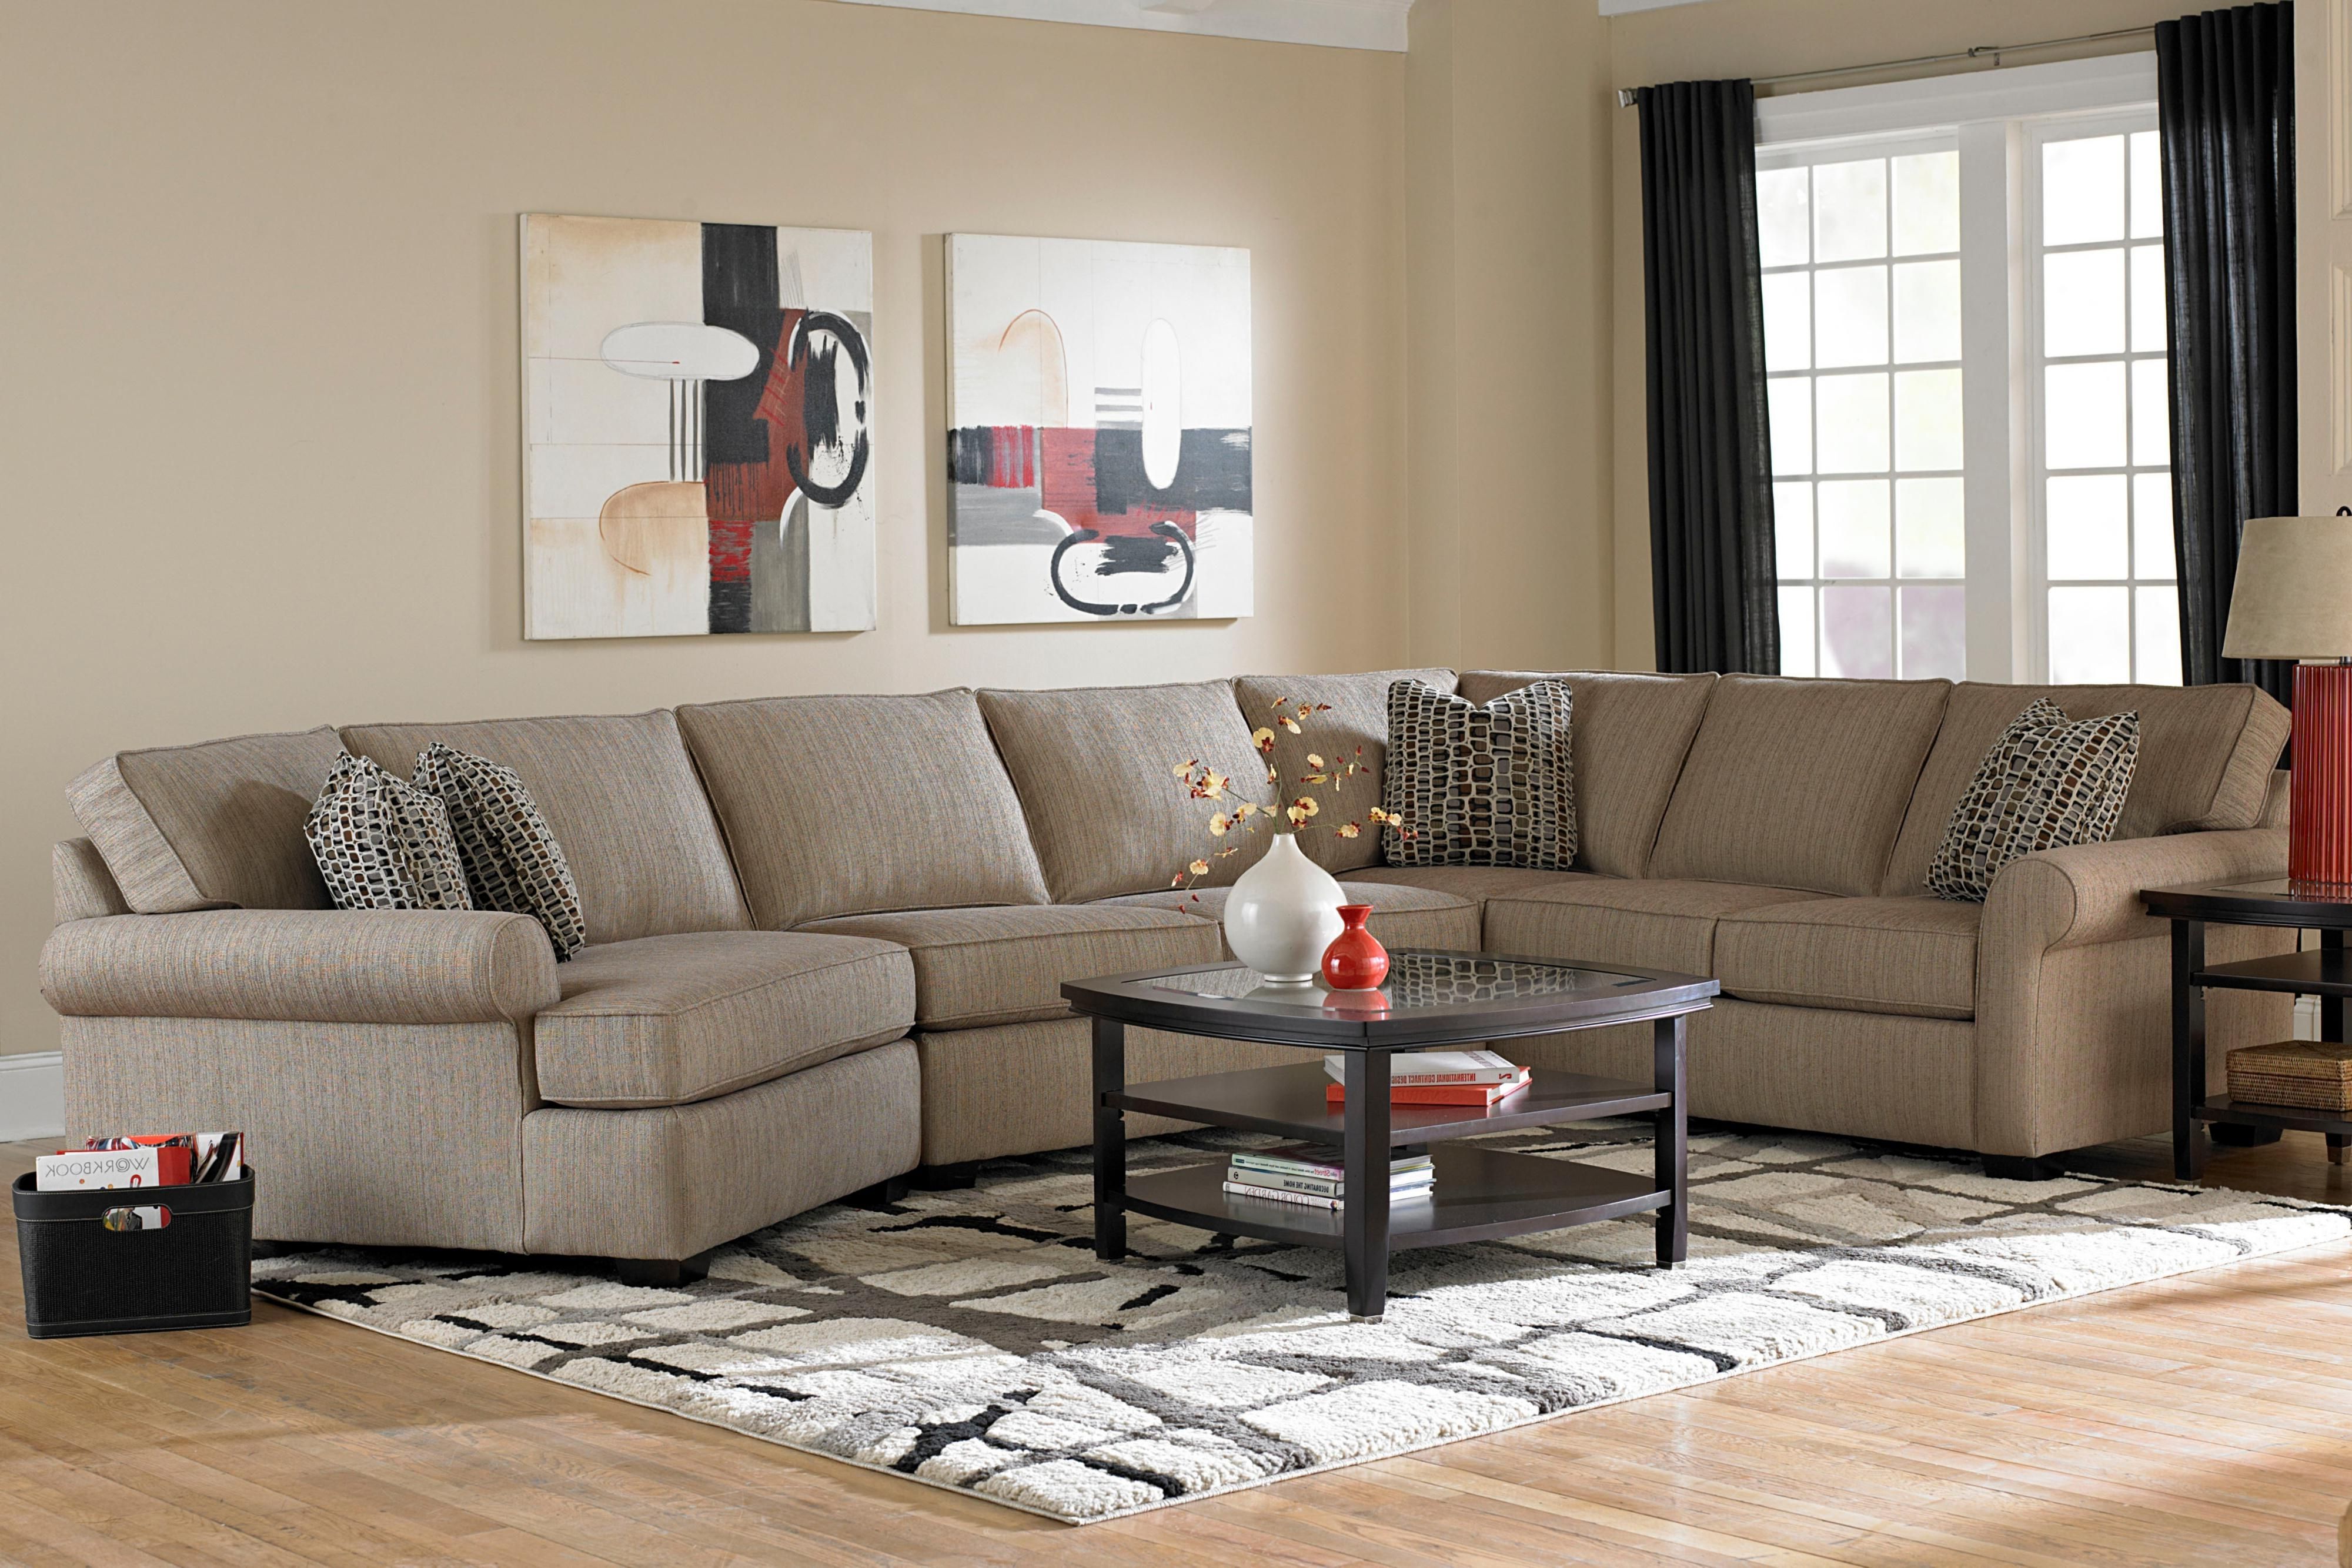 Most Up To Date Grand Rapids Mi Sectional Sofas Intended For Broyhill Furniture Ethan Transitional Sectional Sofa With Right (View 12 of 15)